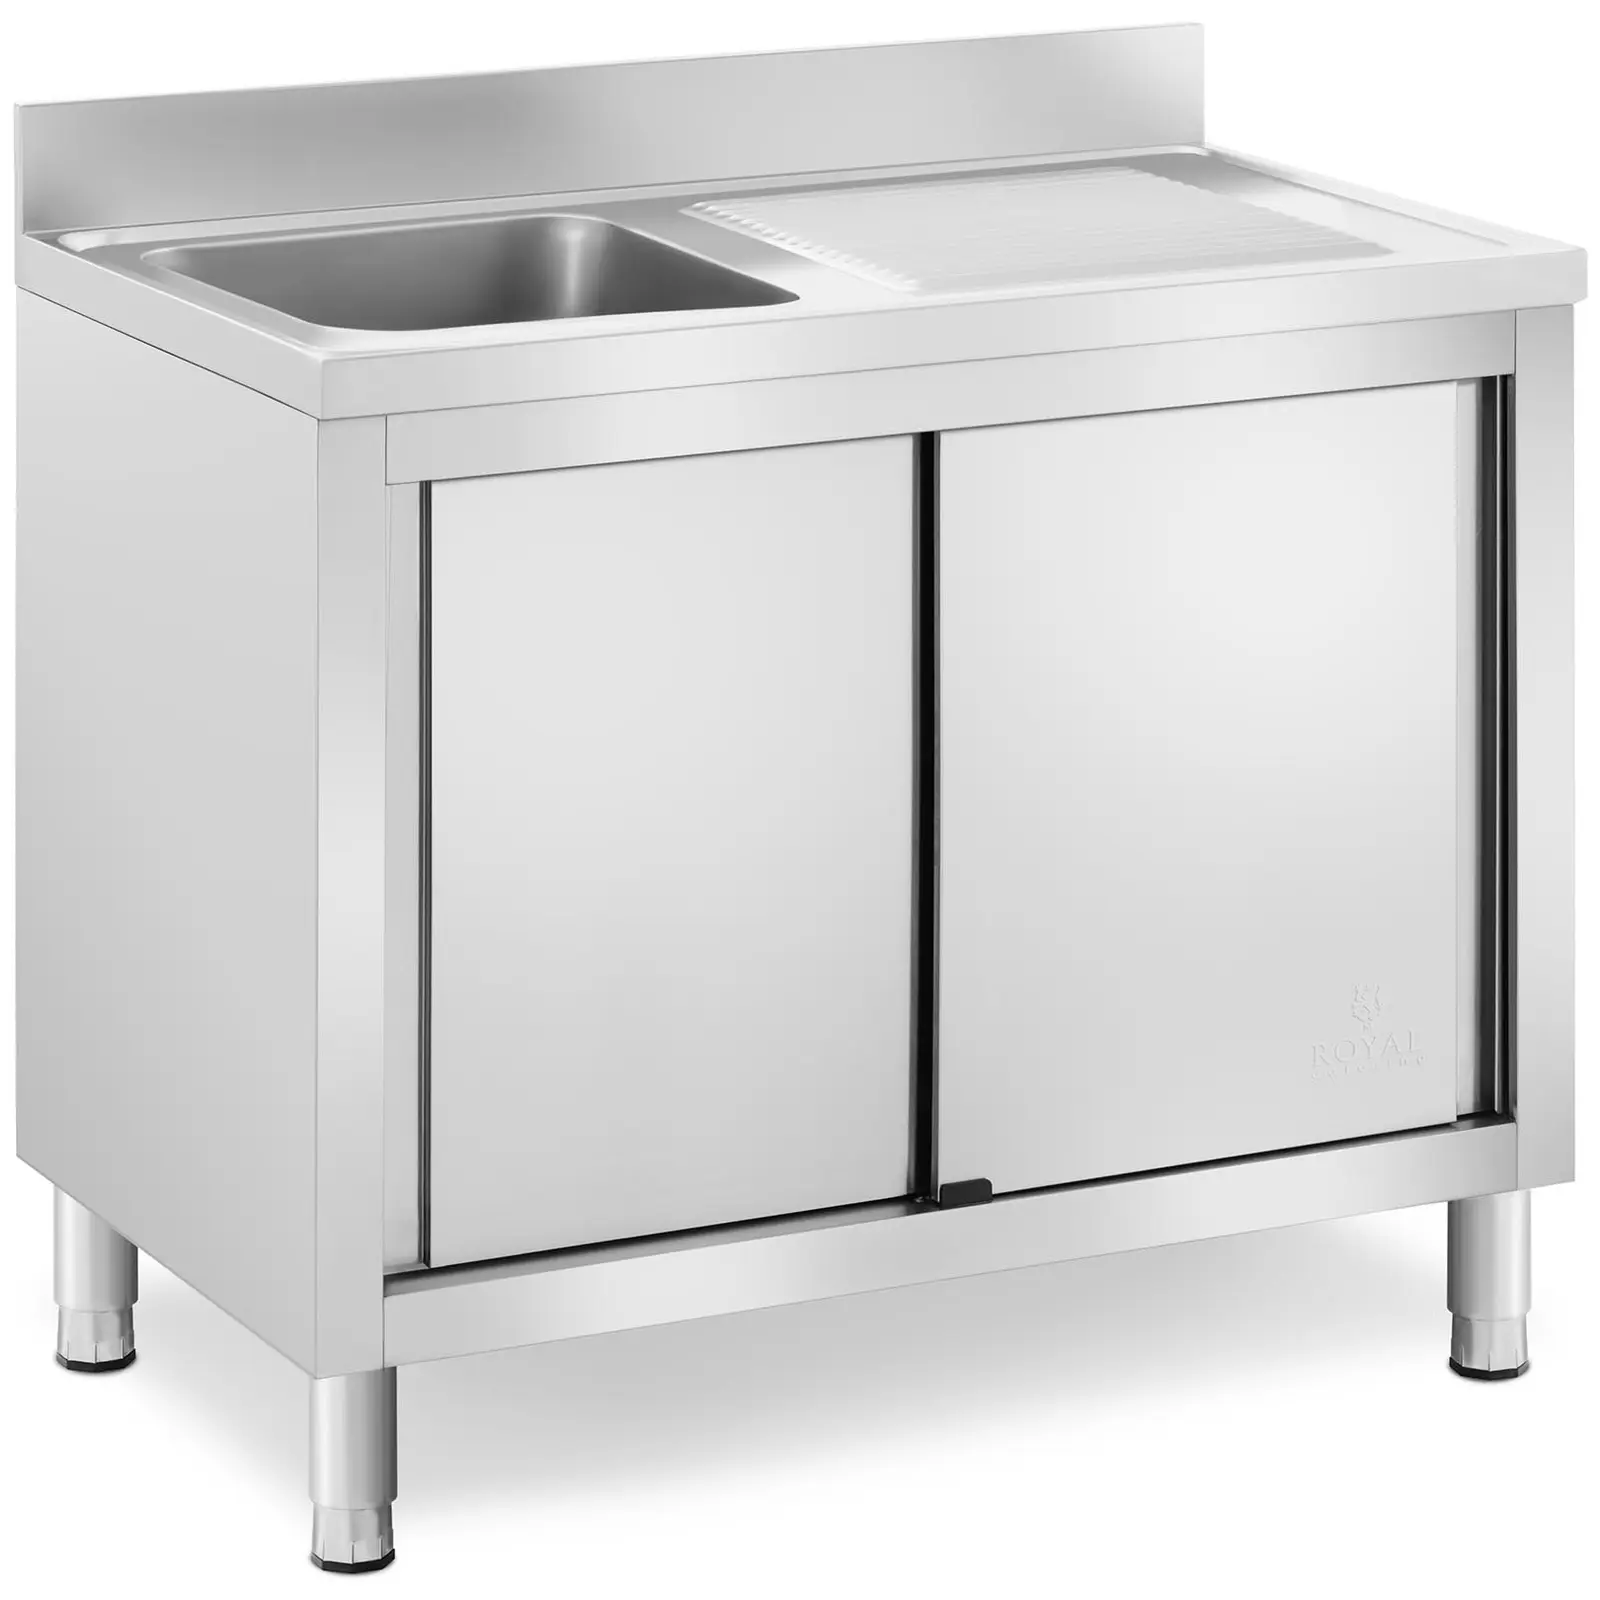 Commercial Kitchen Sink Unit - 1 basin - Royal Catering - Stainless steel - 400 x 400 x 240 mm